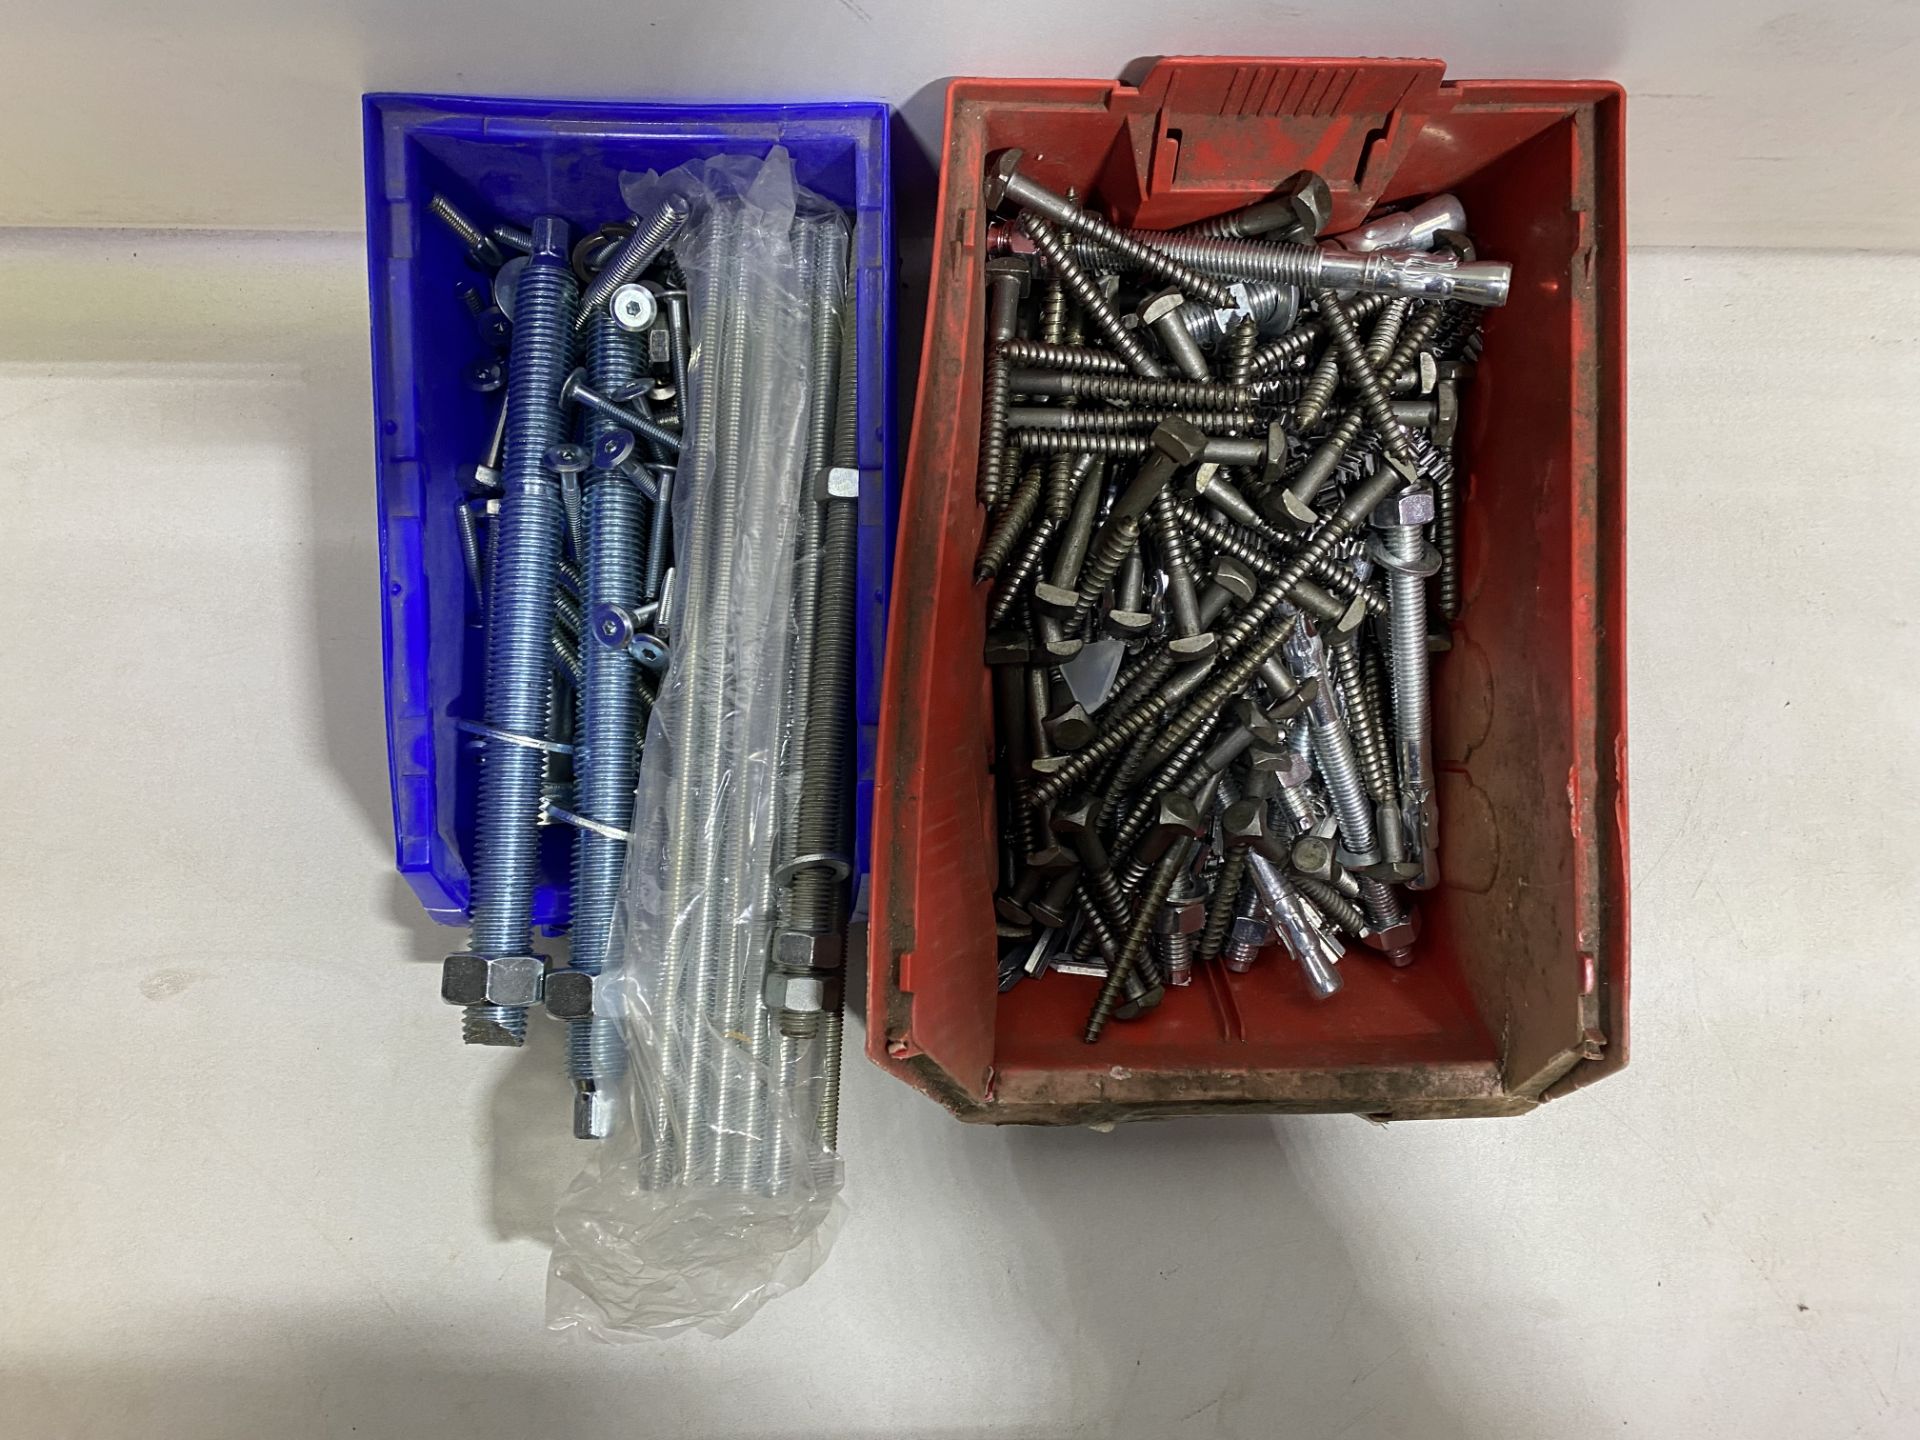 Large Quantity Of Screws,Nuts,Bolts,Fasteners And Various Other Equipment - Image 18 of 20